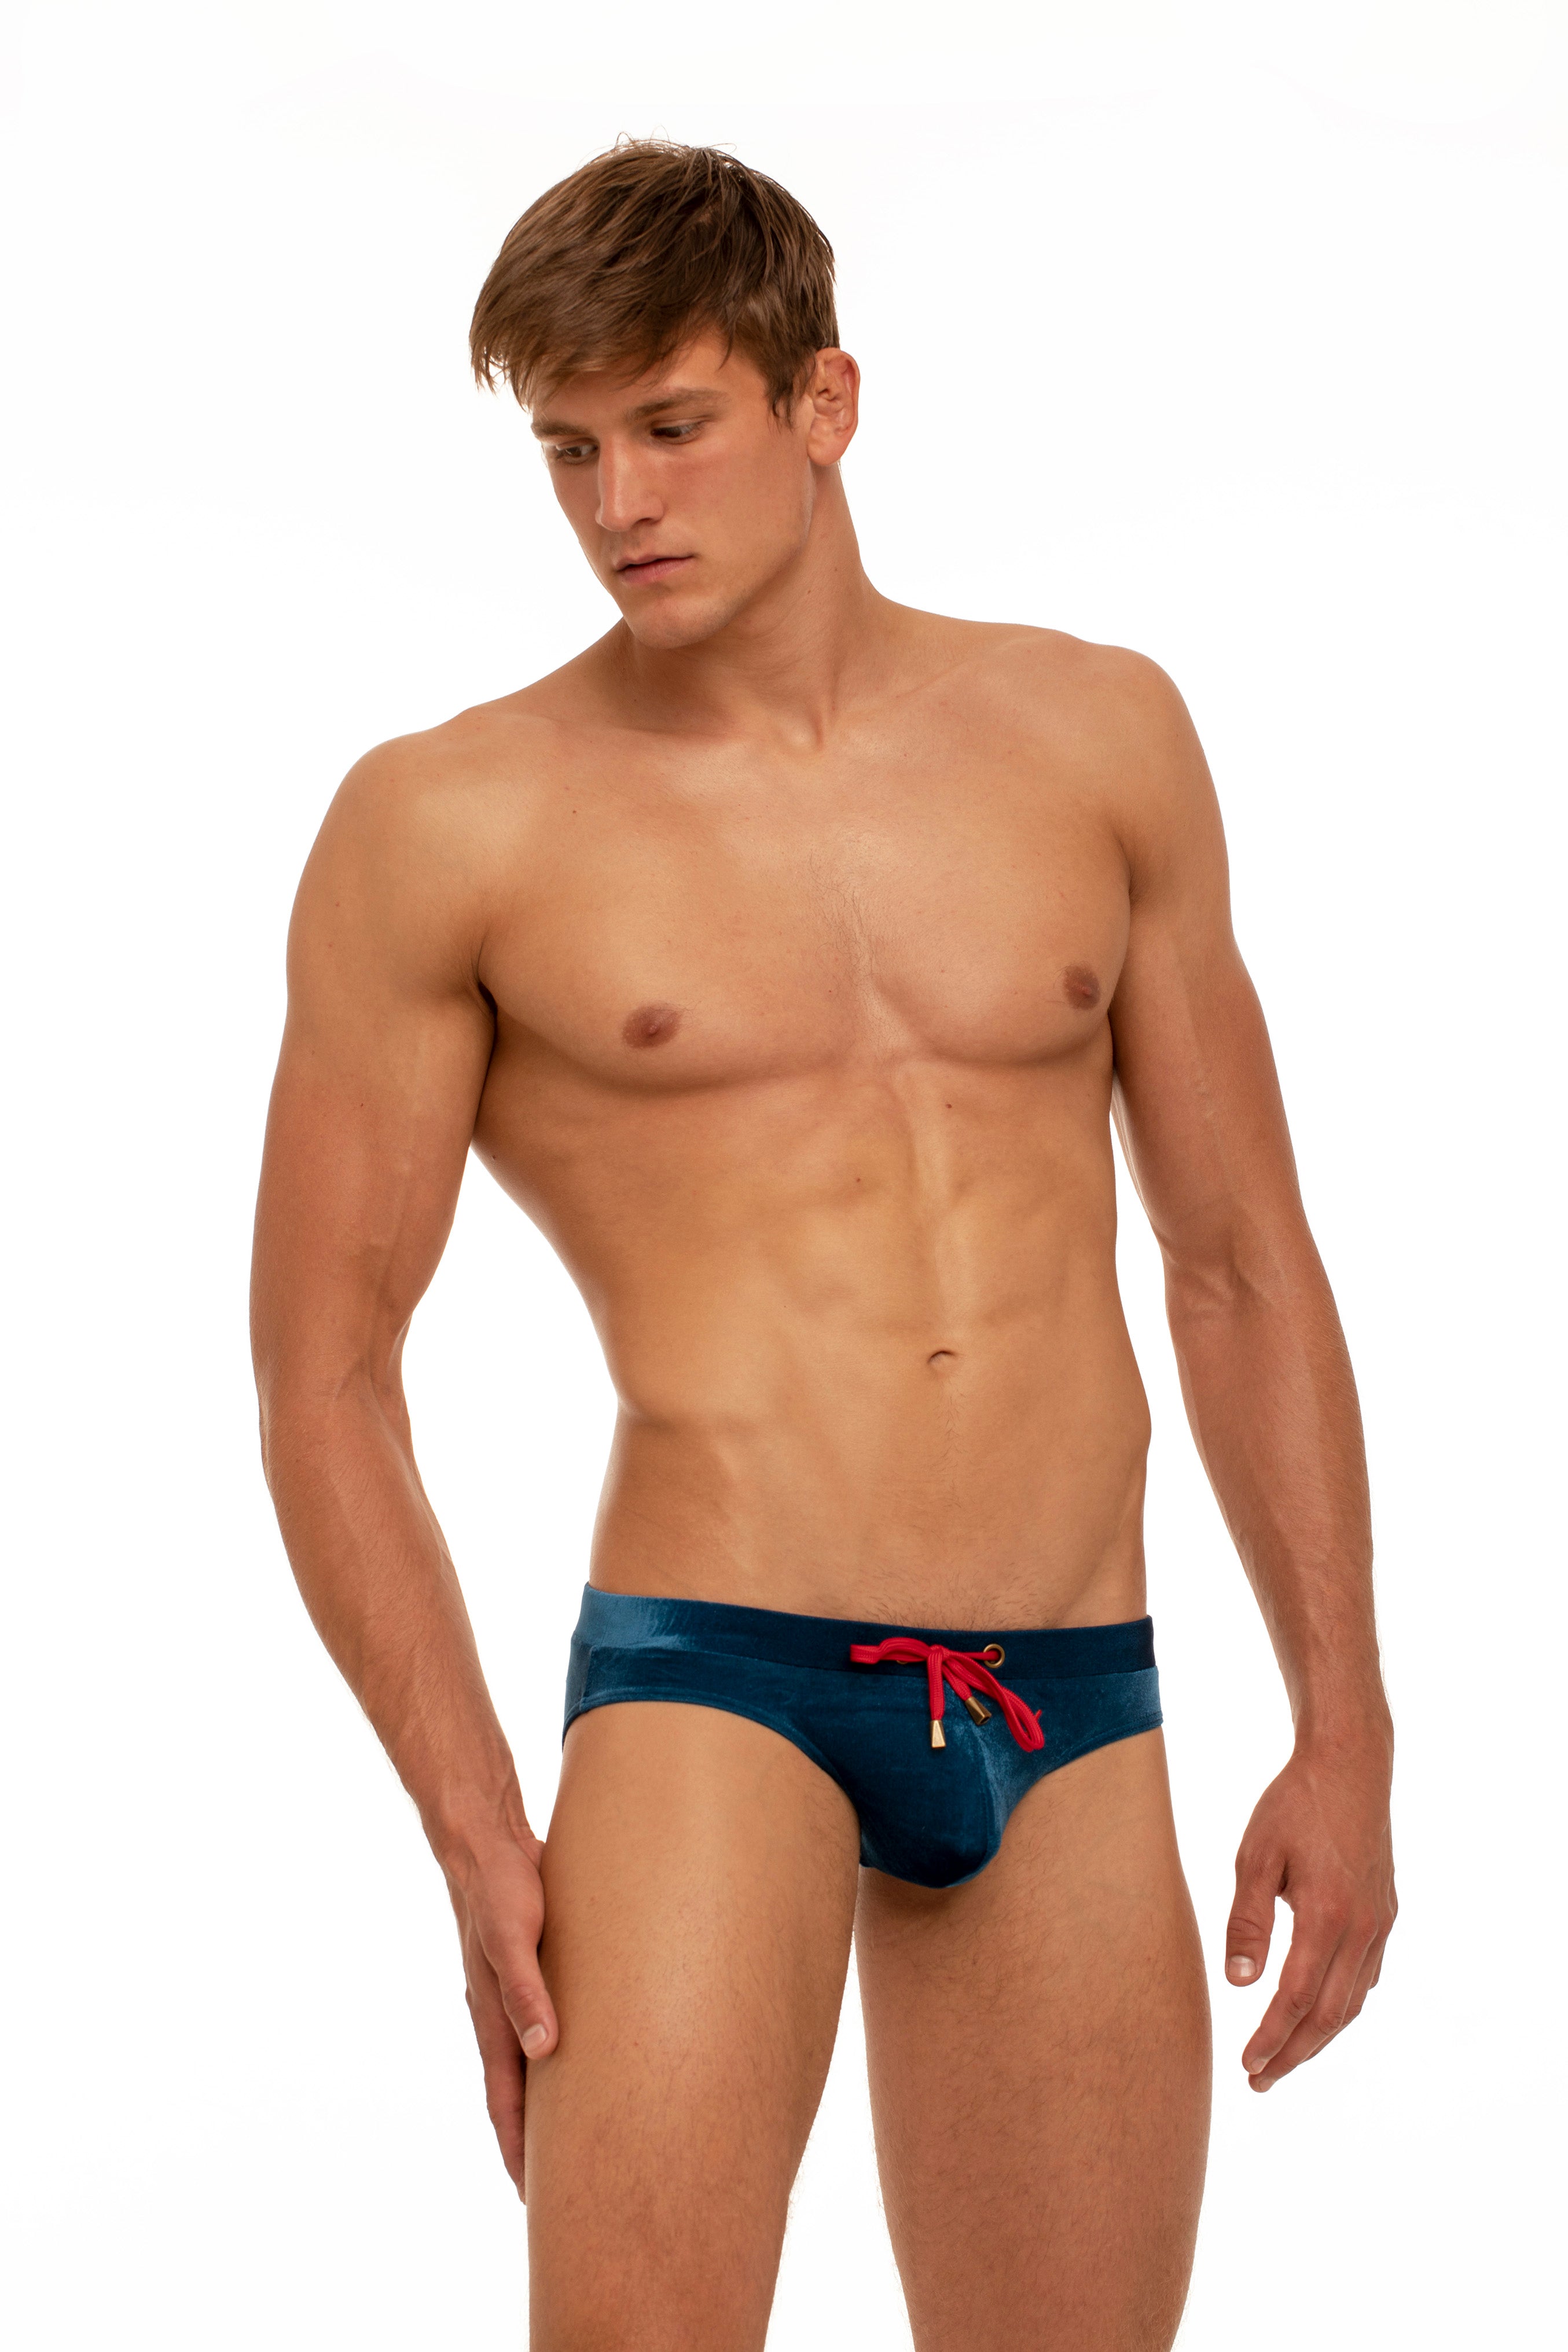 Marcuse Burleigh swim brief in navy stretch velvet with red external drawstring.